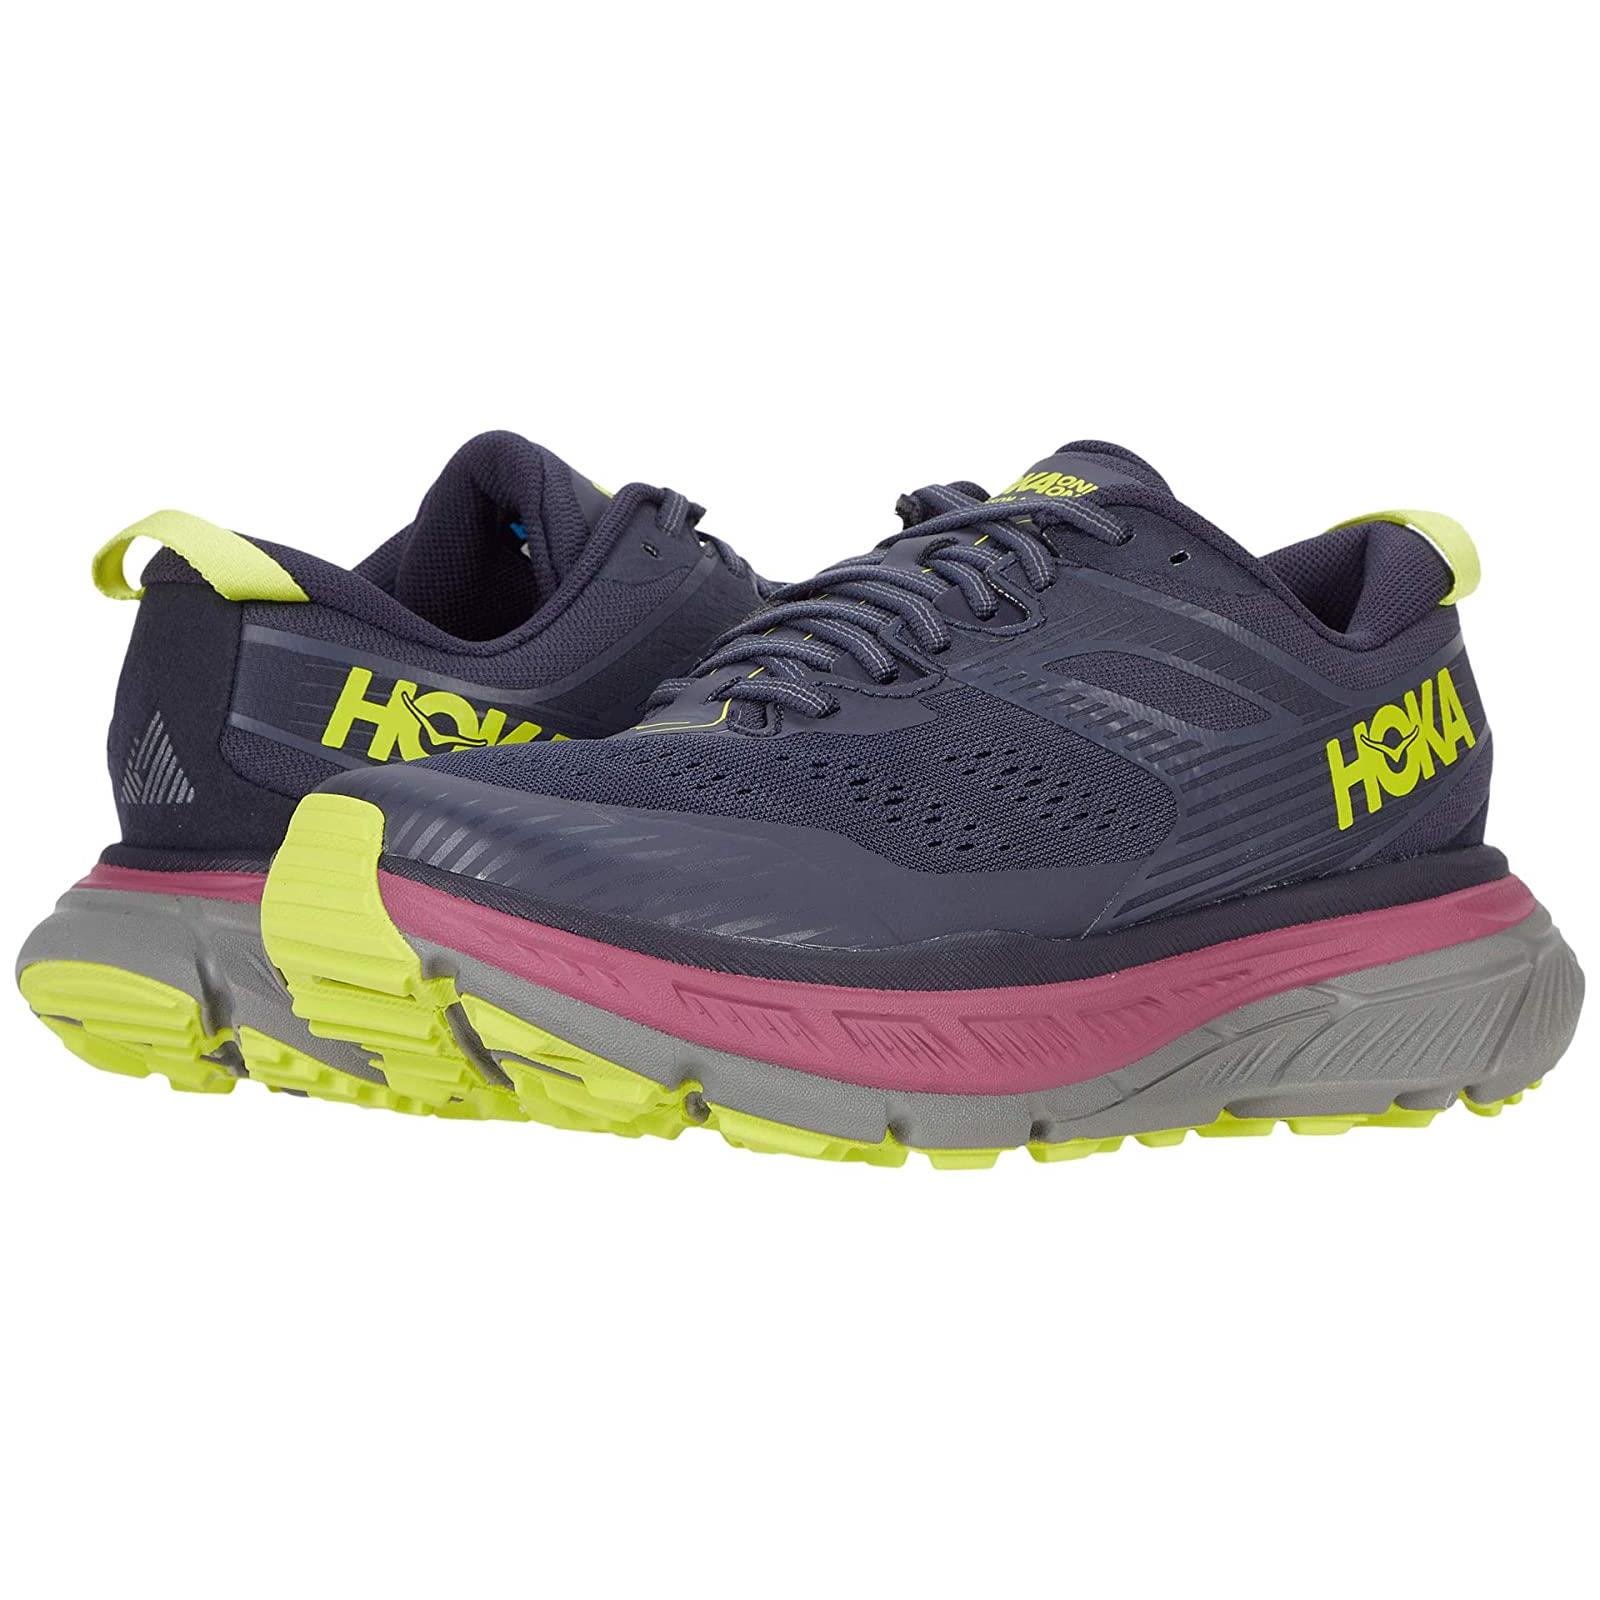 Woman`s Sneakers Athletic Shoes Hoka One One Stinson Atr 6 Deep Well/Evening Primrose